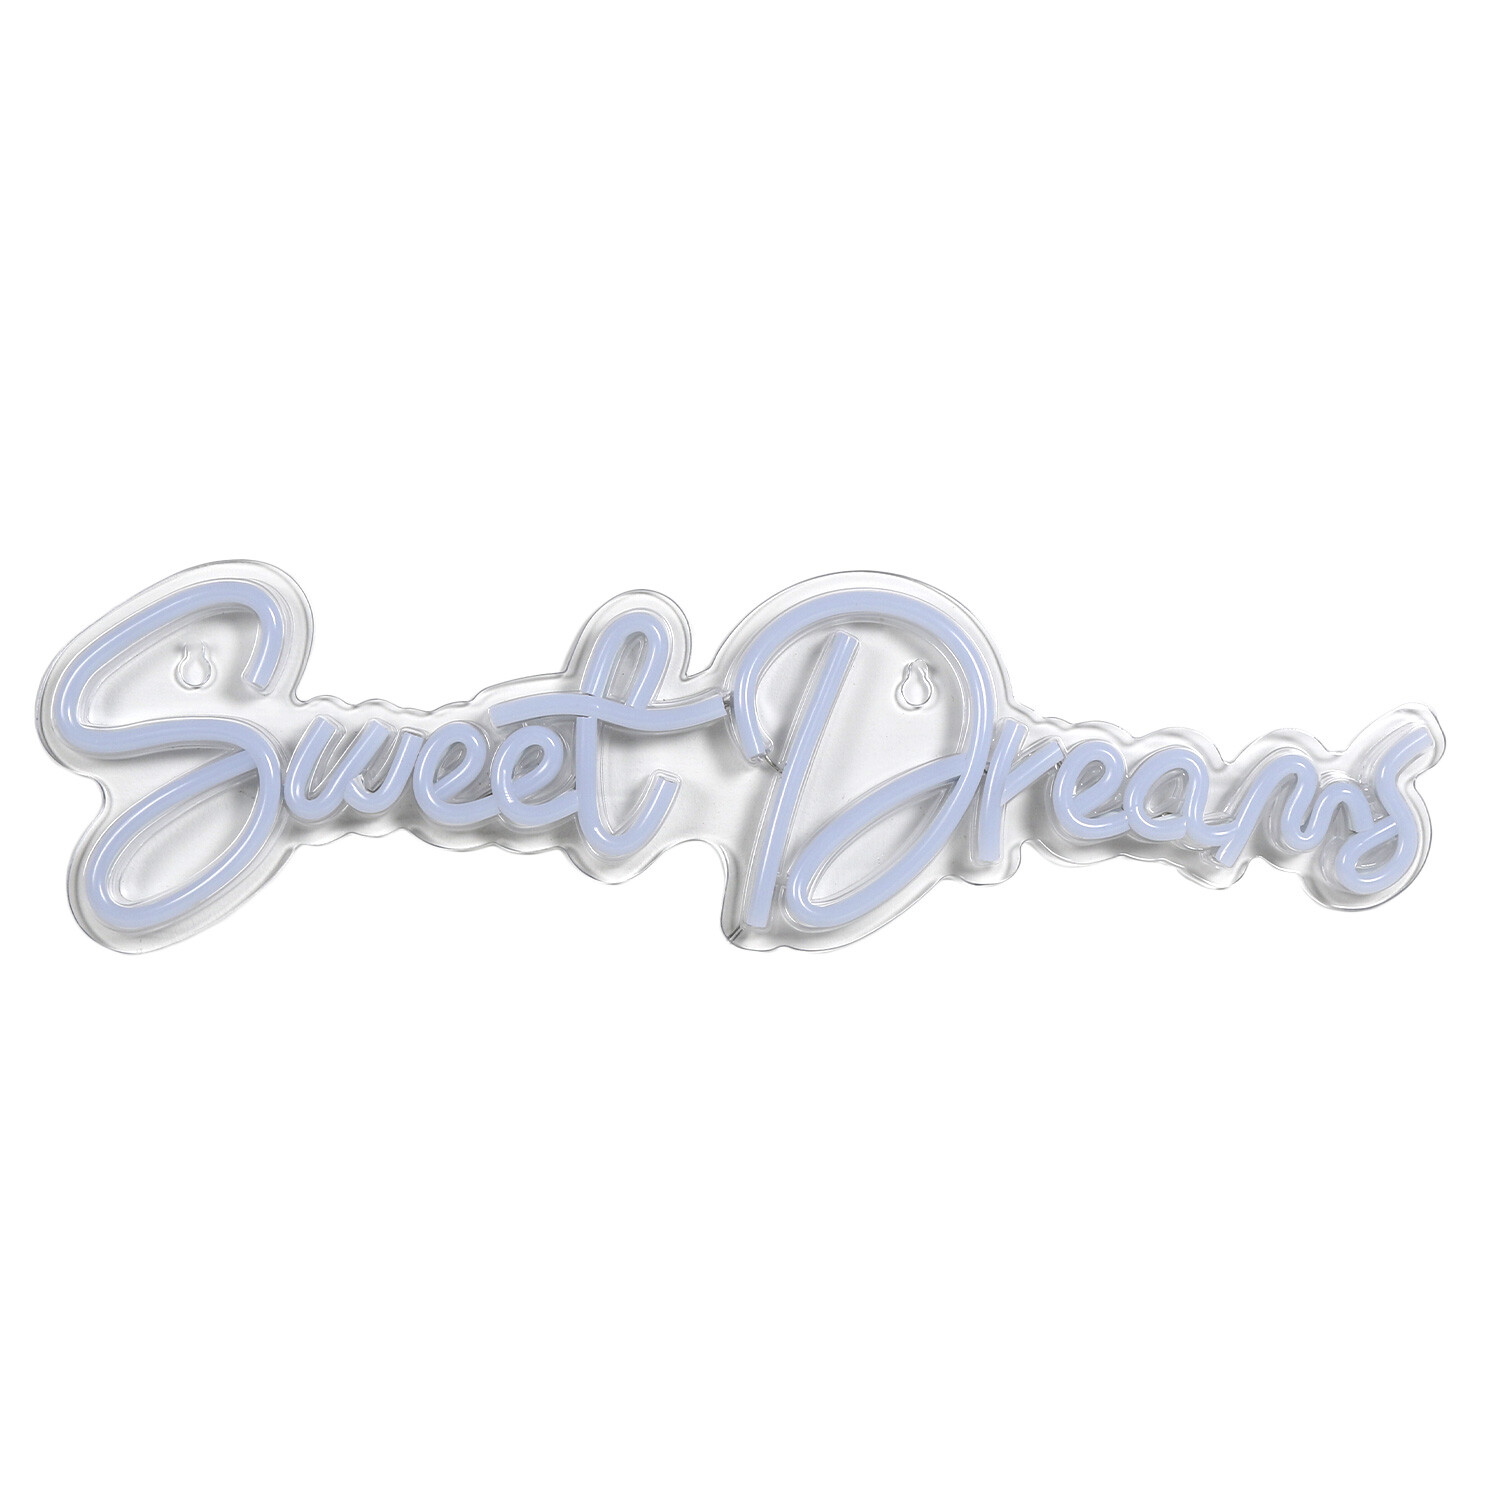 Sweet Dreams Neon LED Sign Image 2